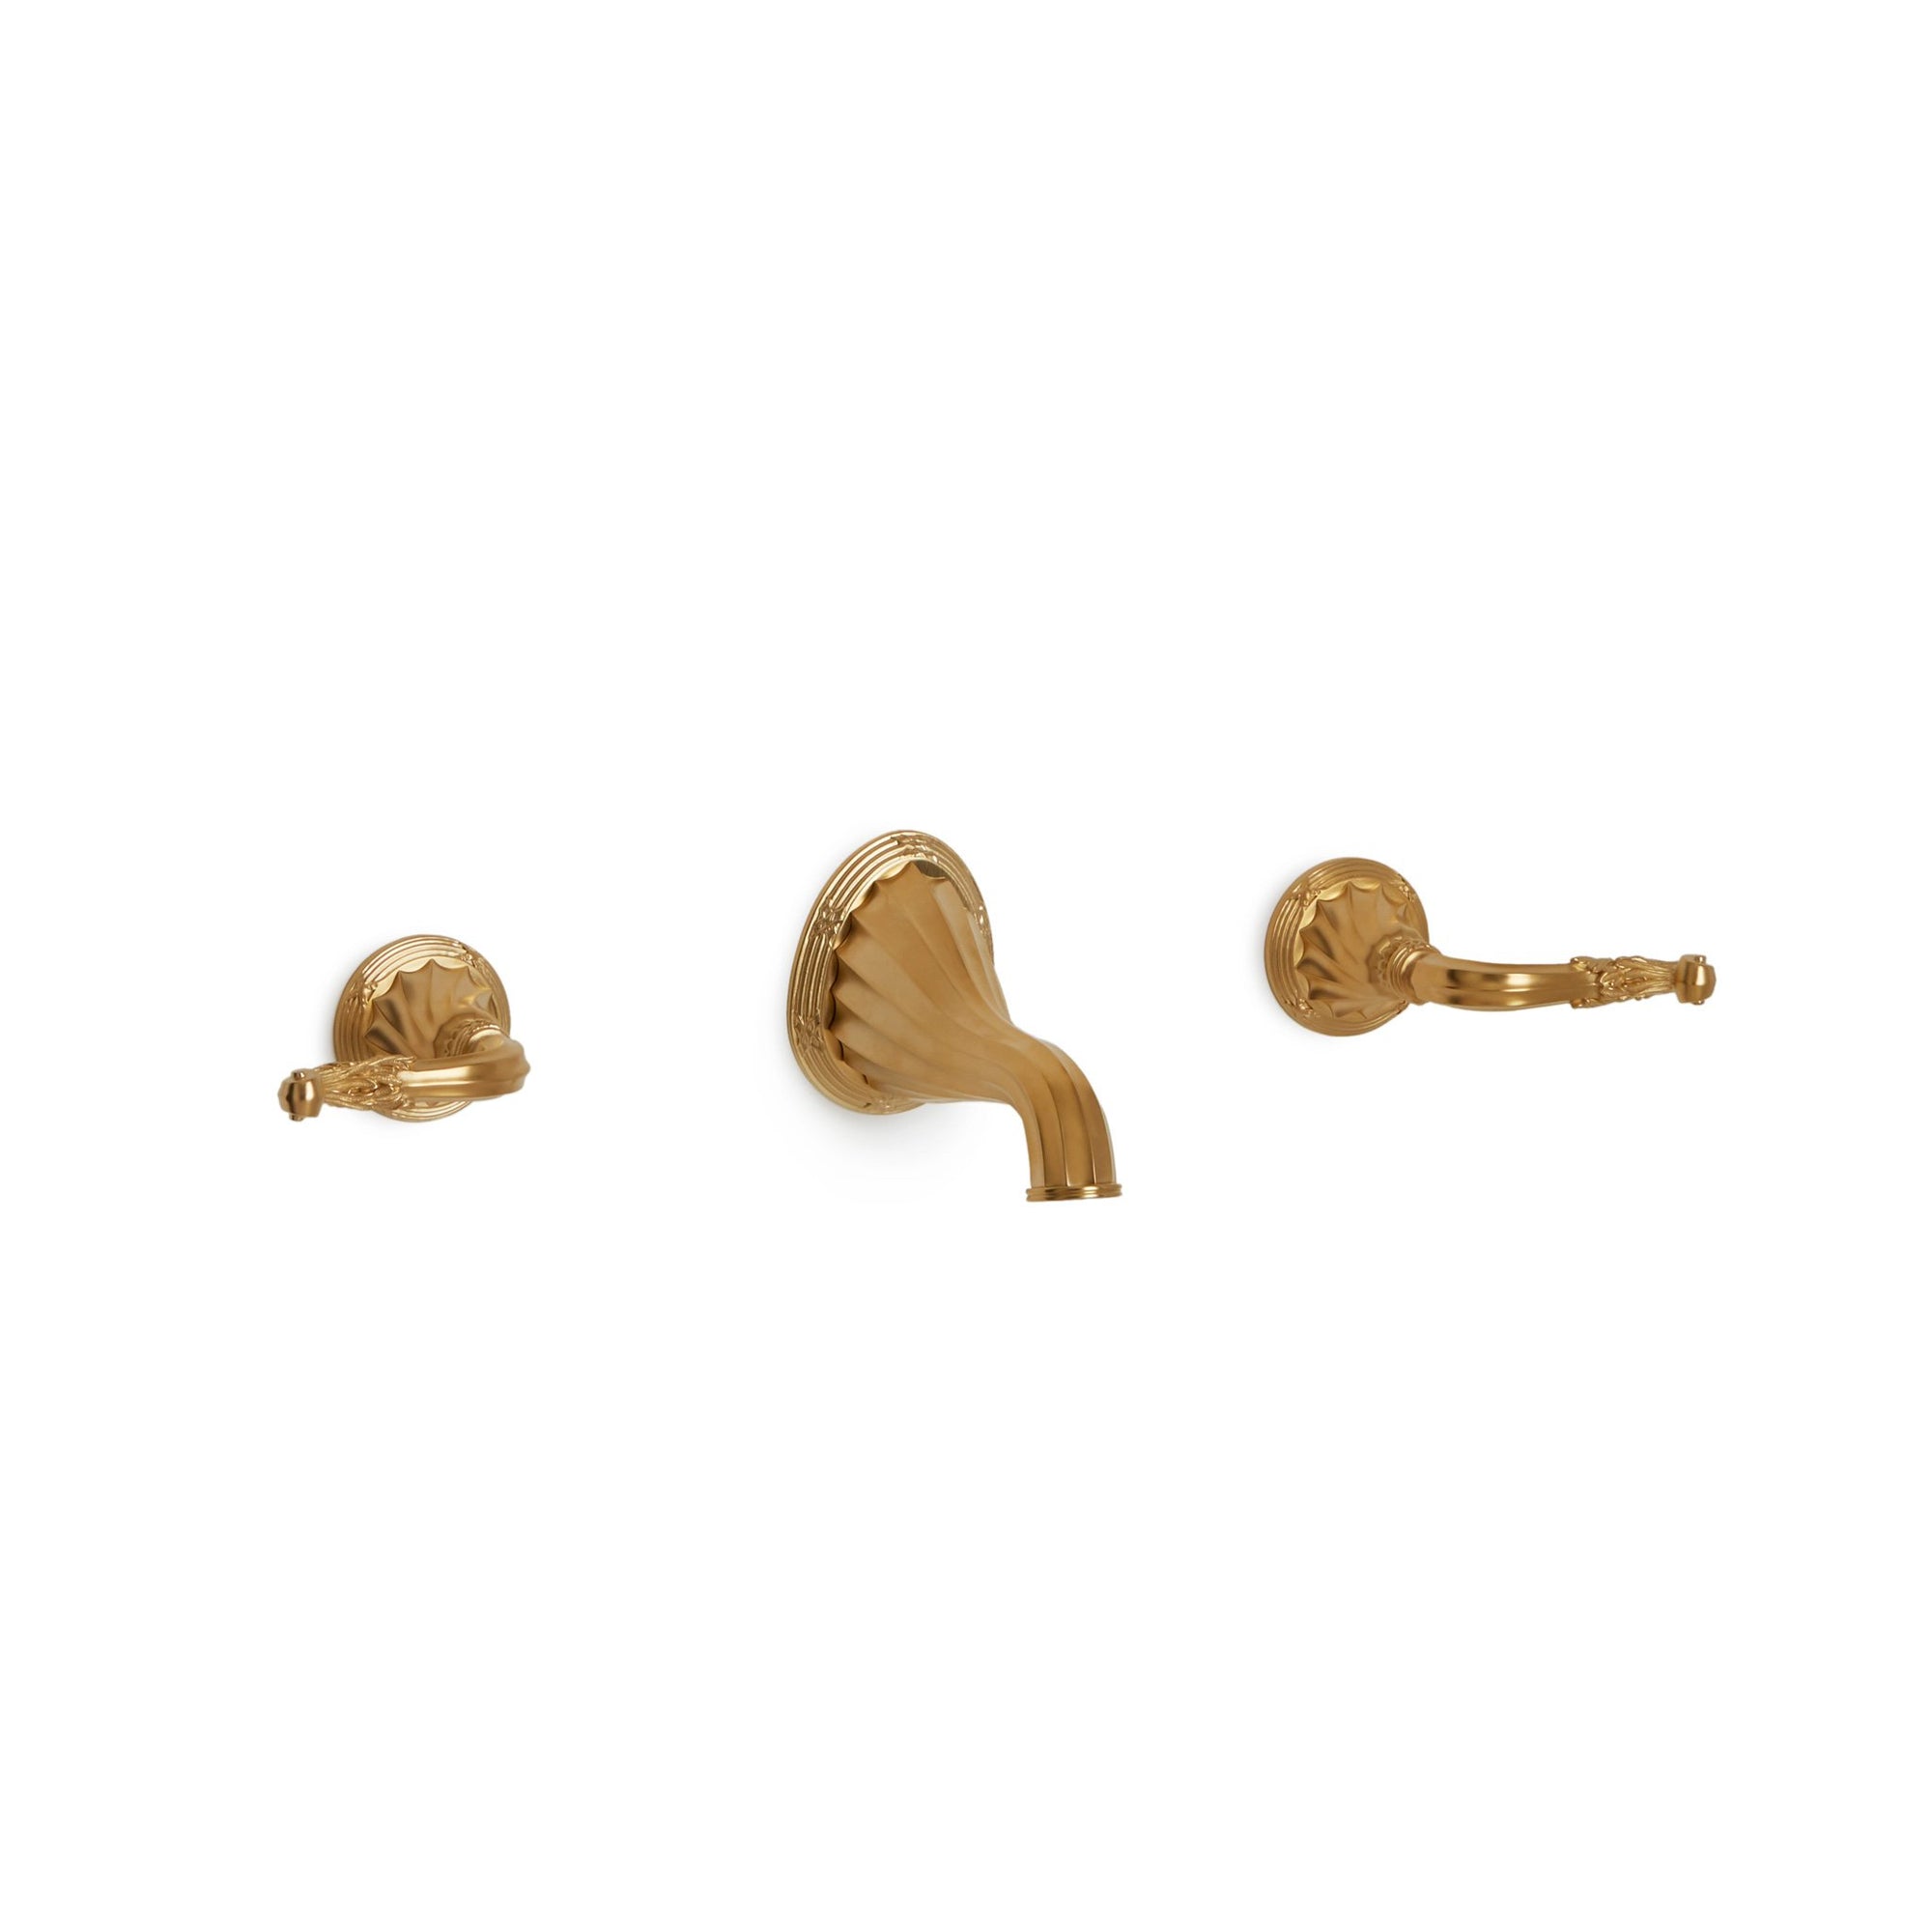 0912WBS818-GP Sherle Wagner International Ribbon and Reed Lever Wall Mount Faucet Set in Gold Plate metal finish